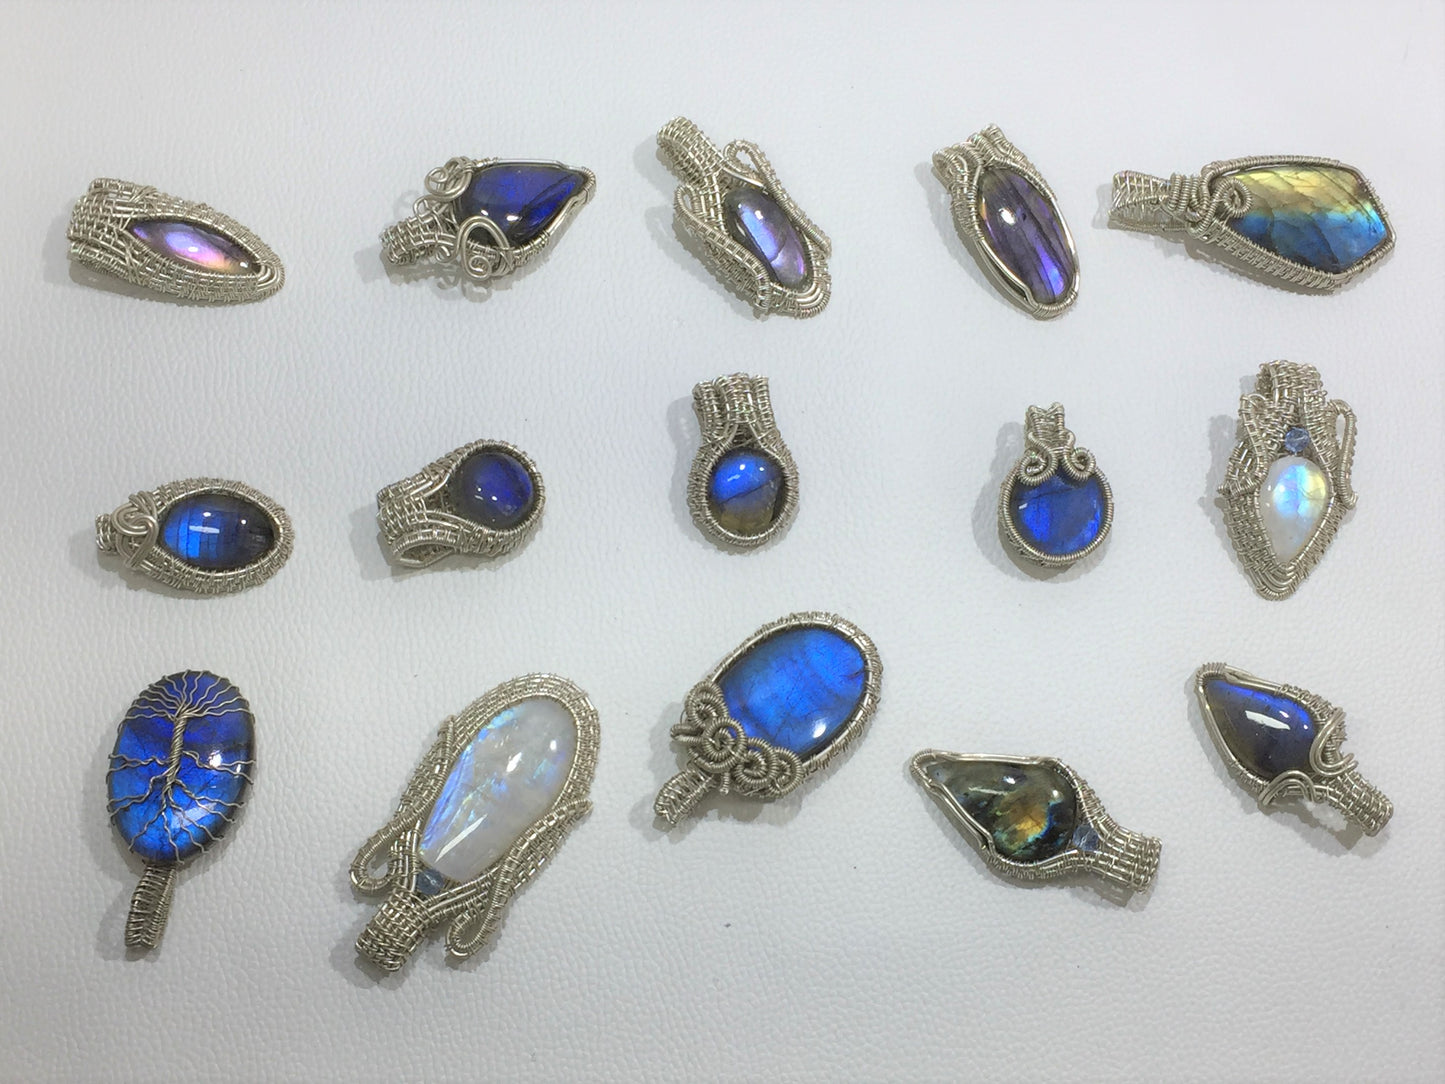 Wire Wrapping Silver Jewelry Pendants Wholesale Price Lot with Natural Gemstones